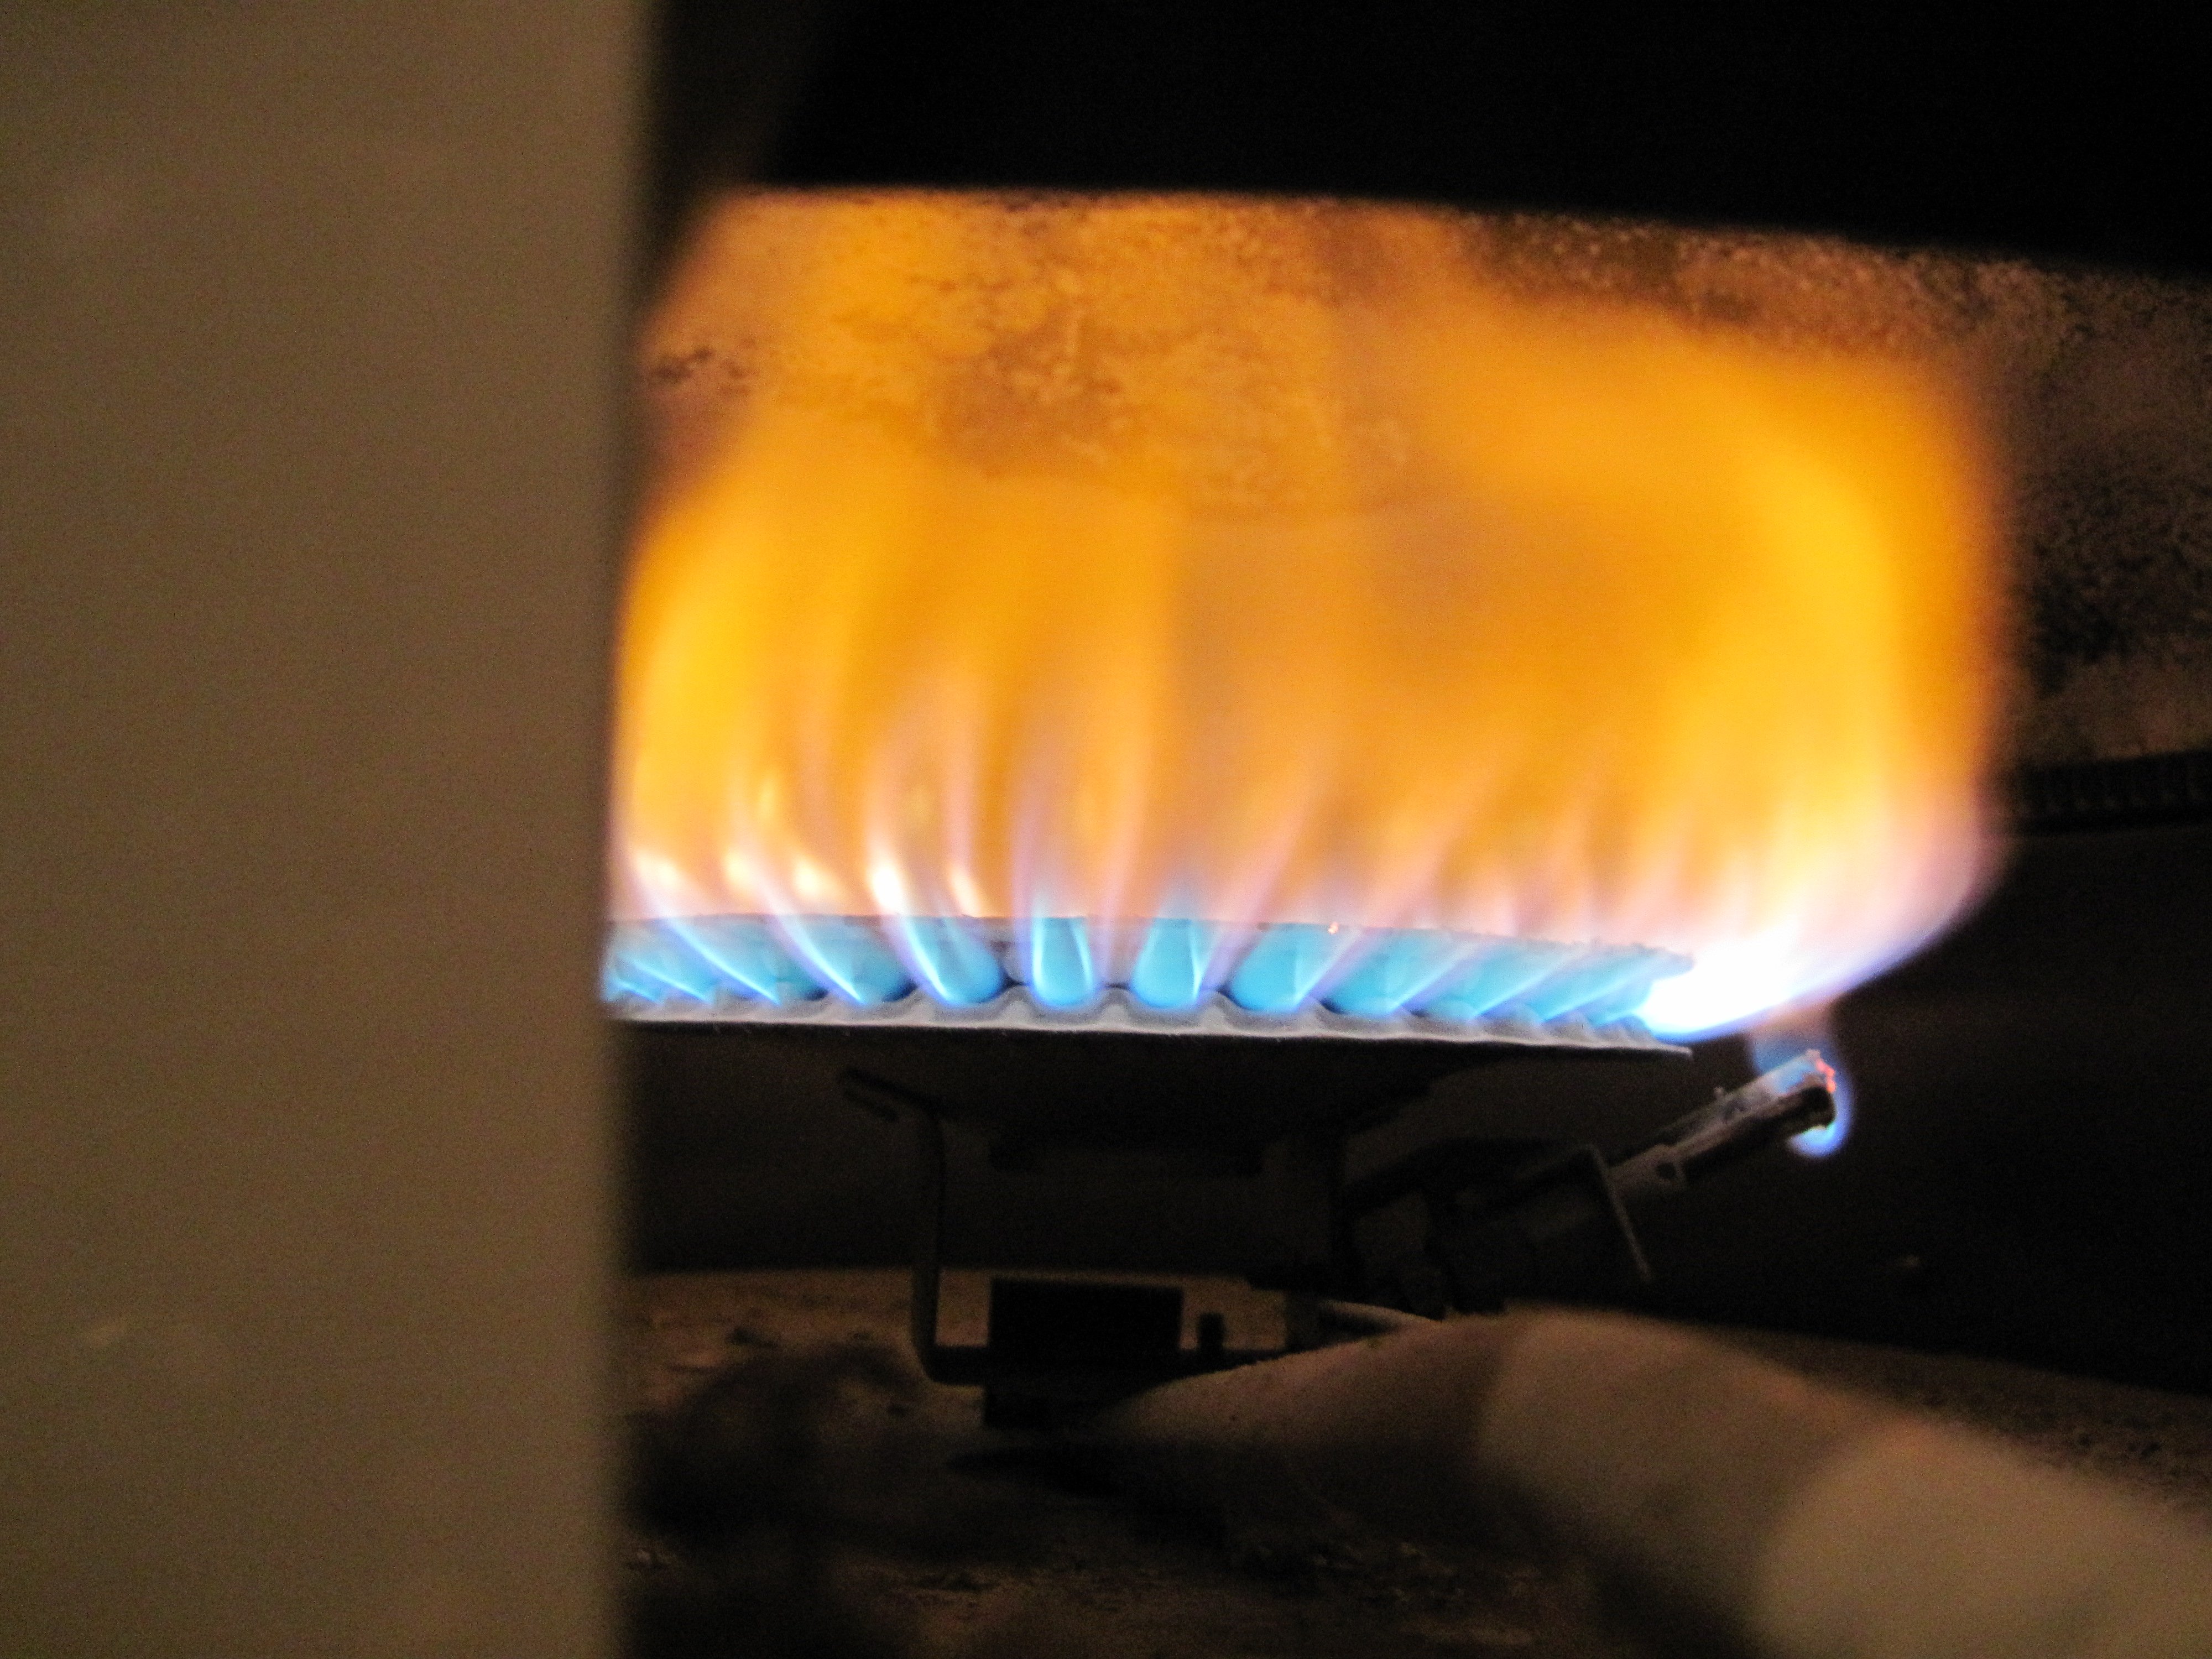 Natural Gas and LPG Additives - What improvement do they offer?